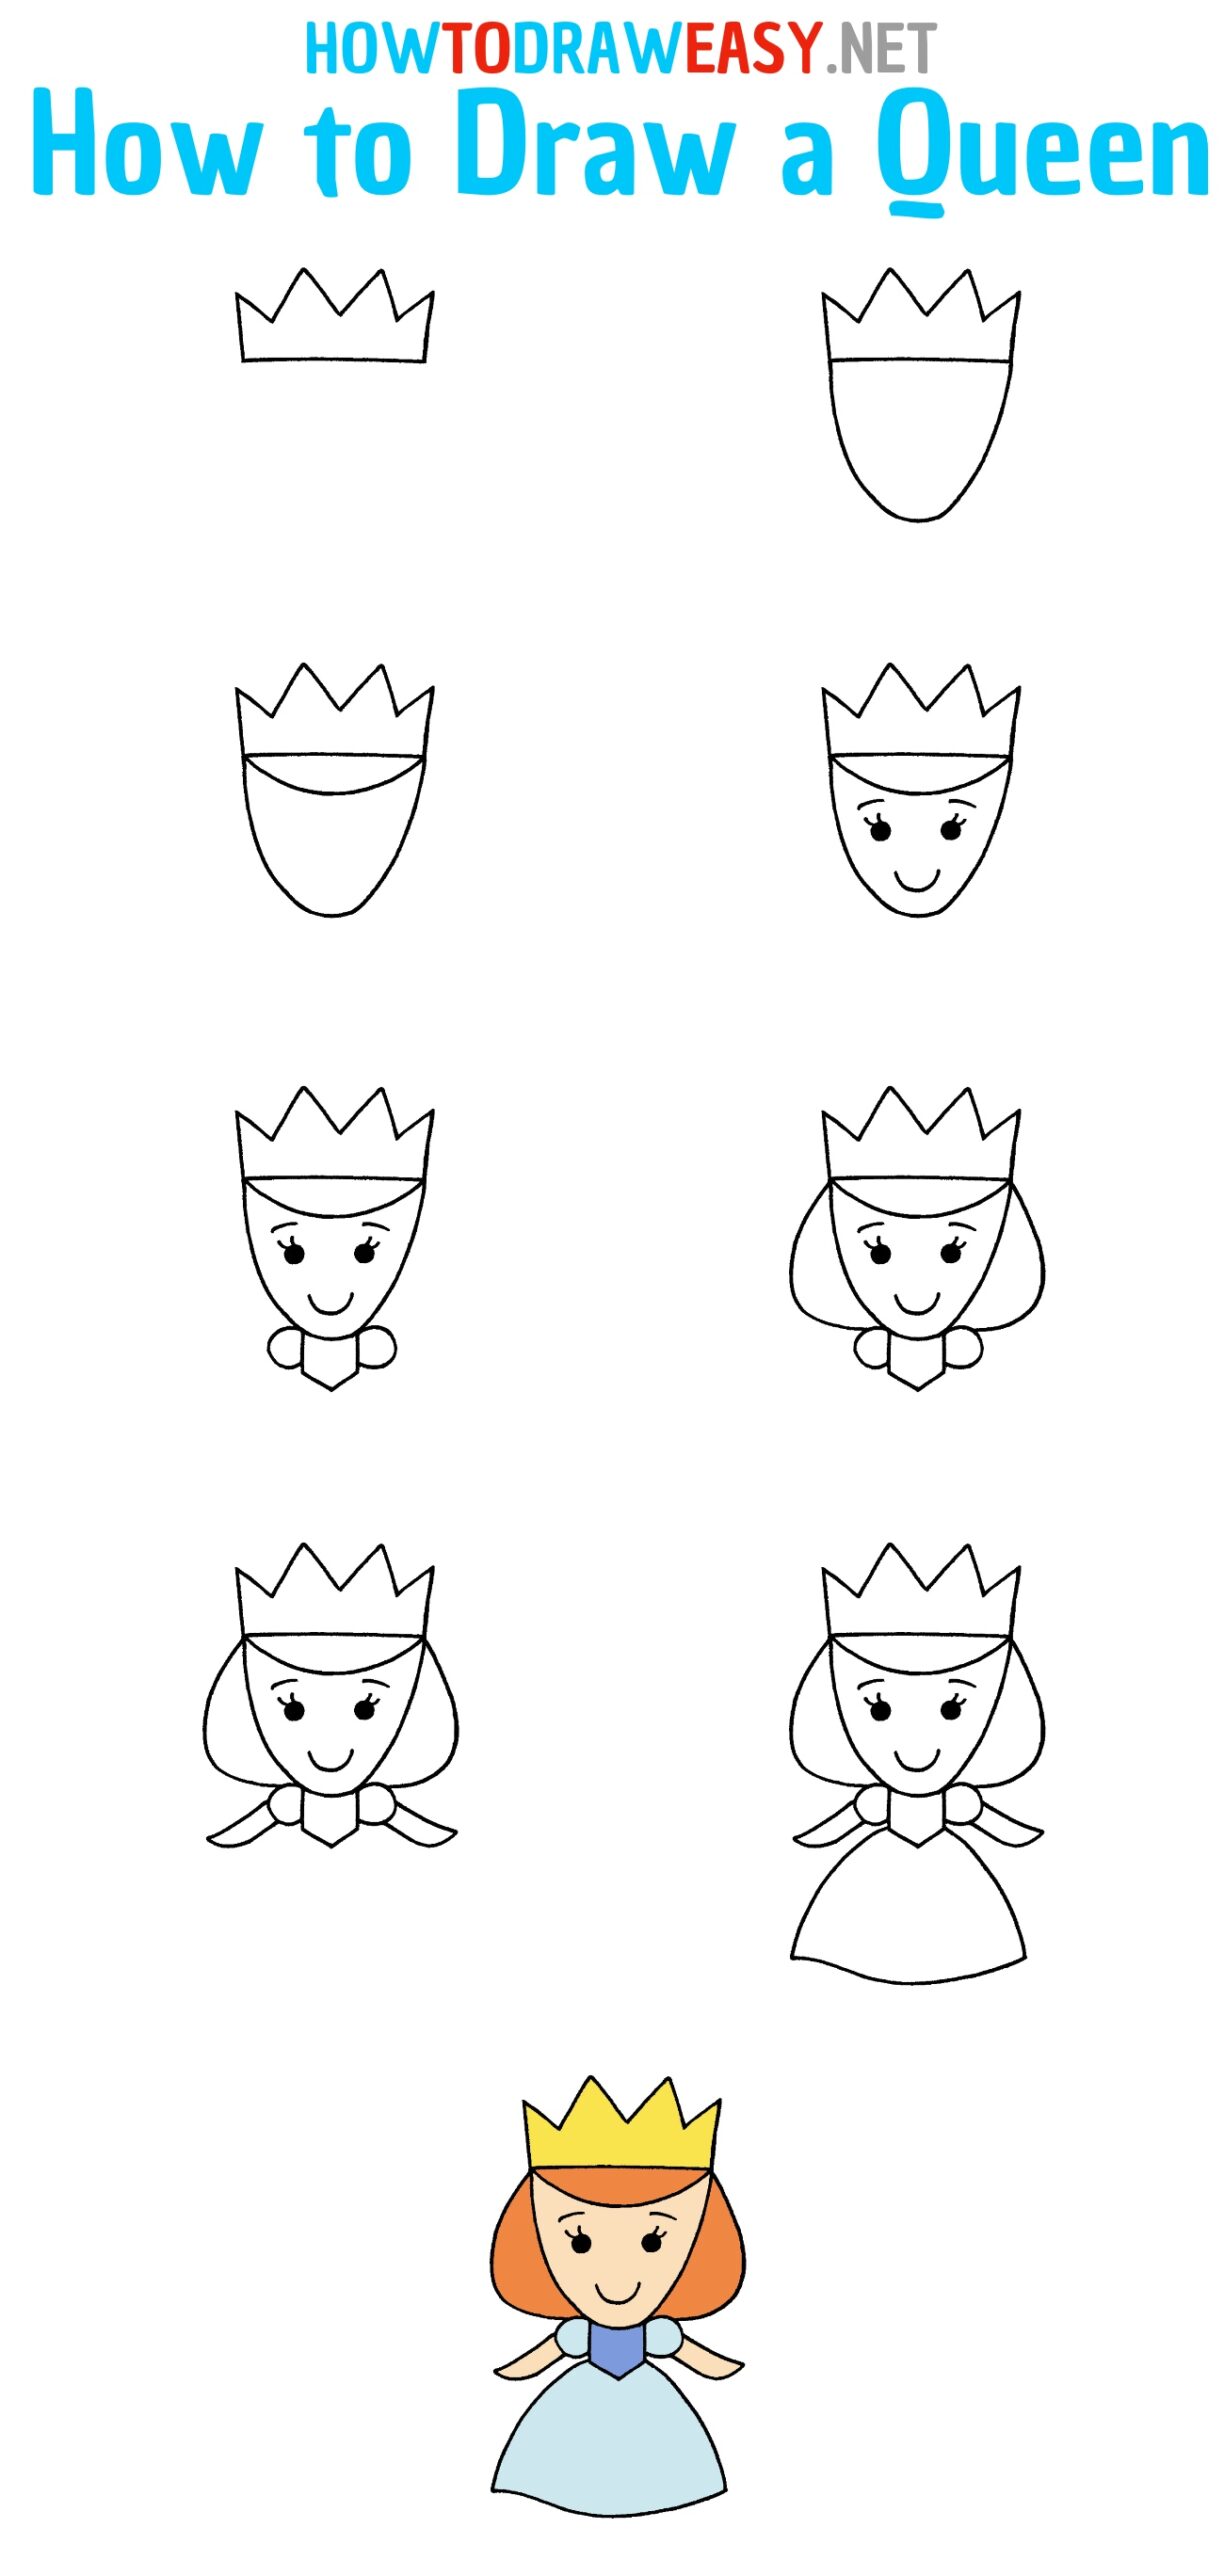 How to Draw a Queen Step by Step